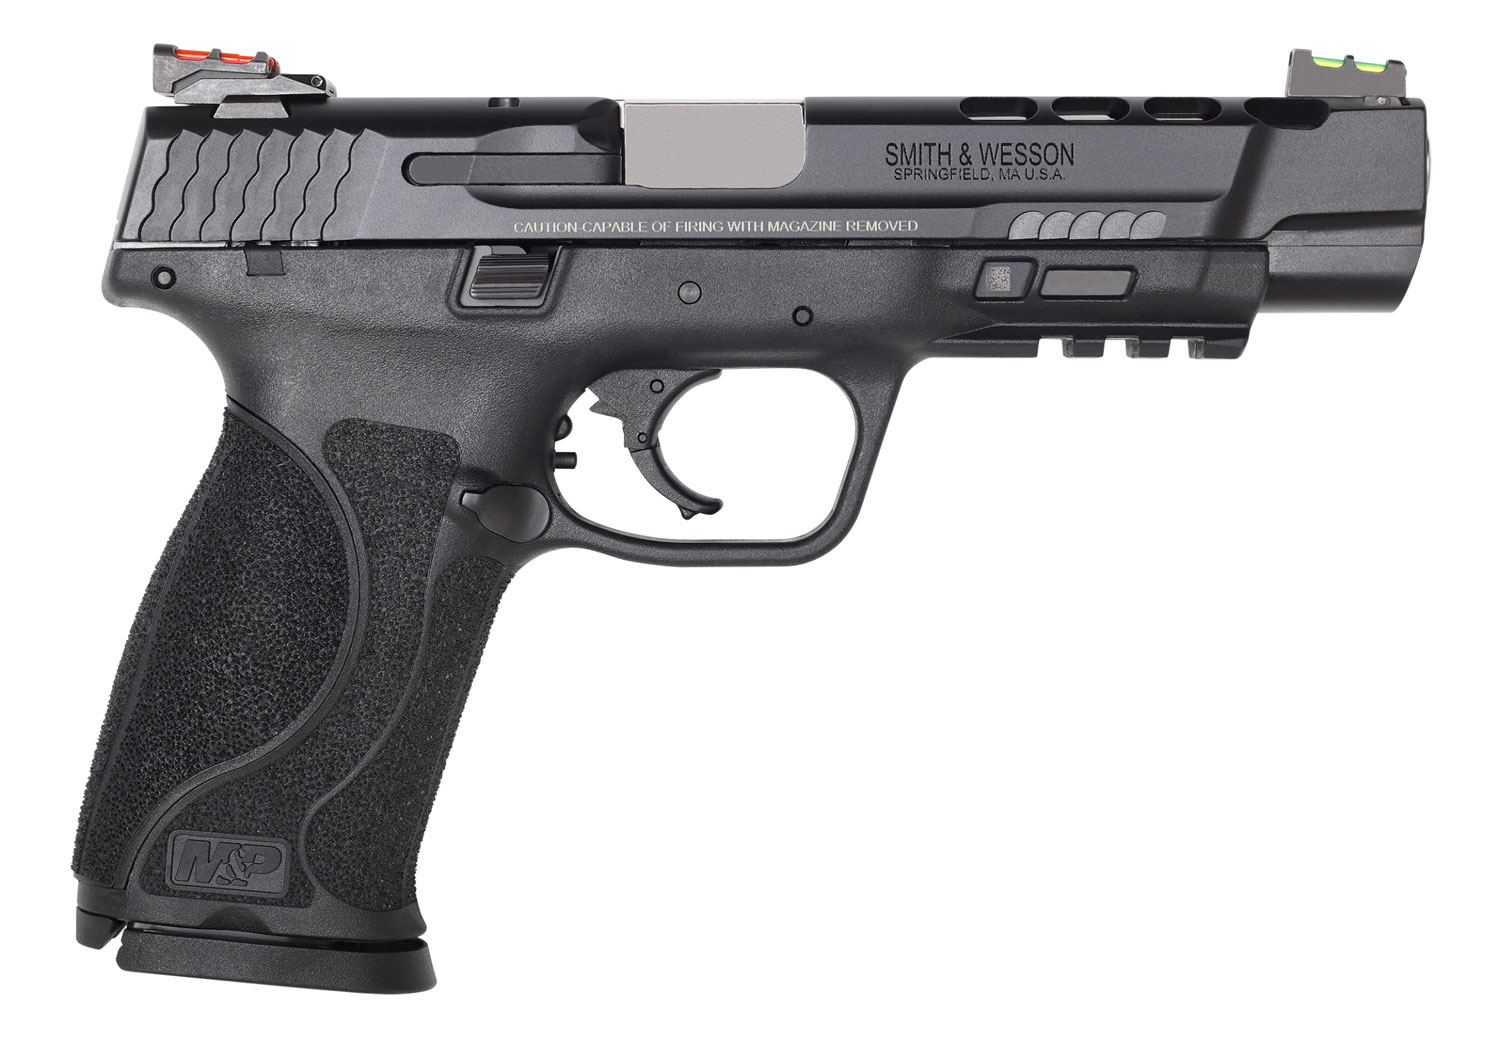 Smith & Wesson 11825 Performance Center M&P M2.0 40 S&W 5